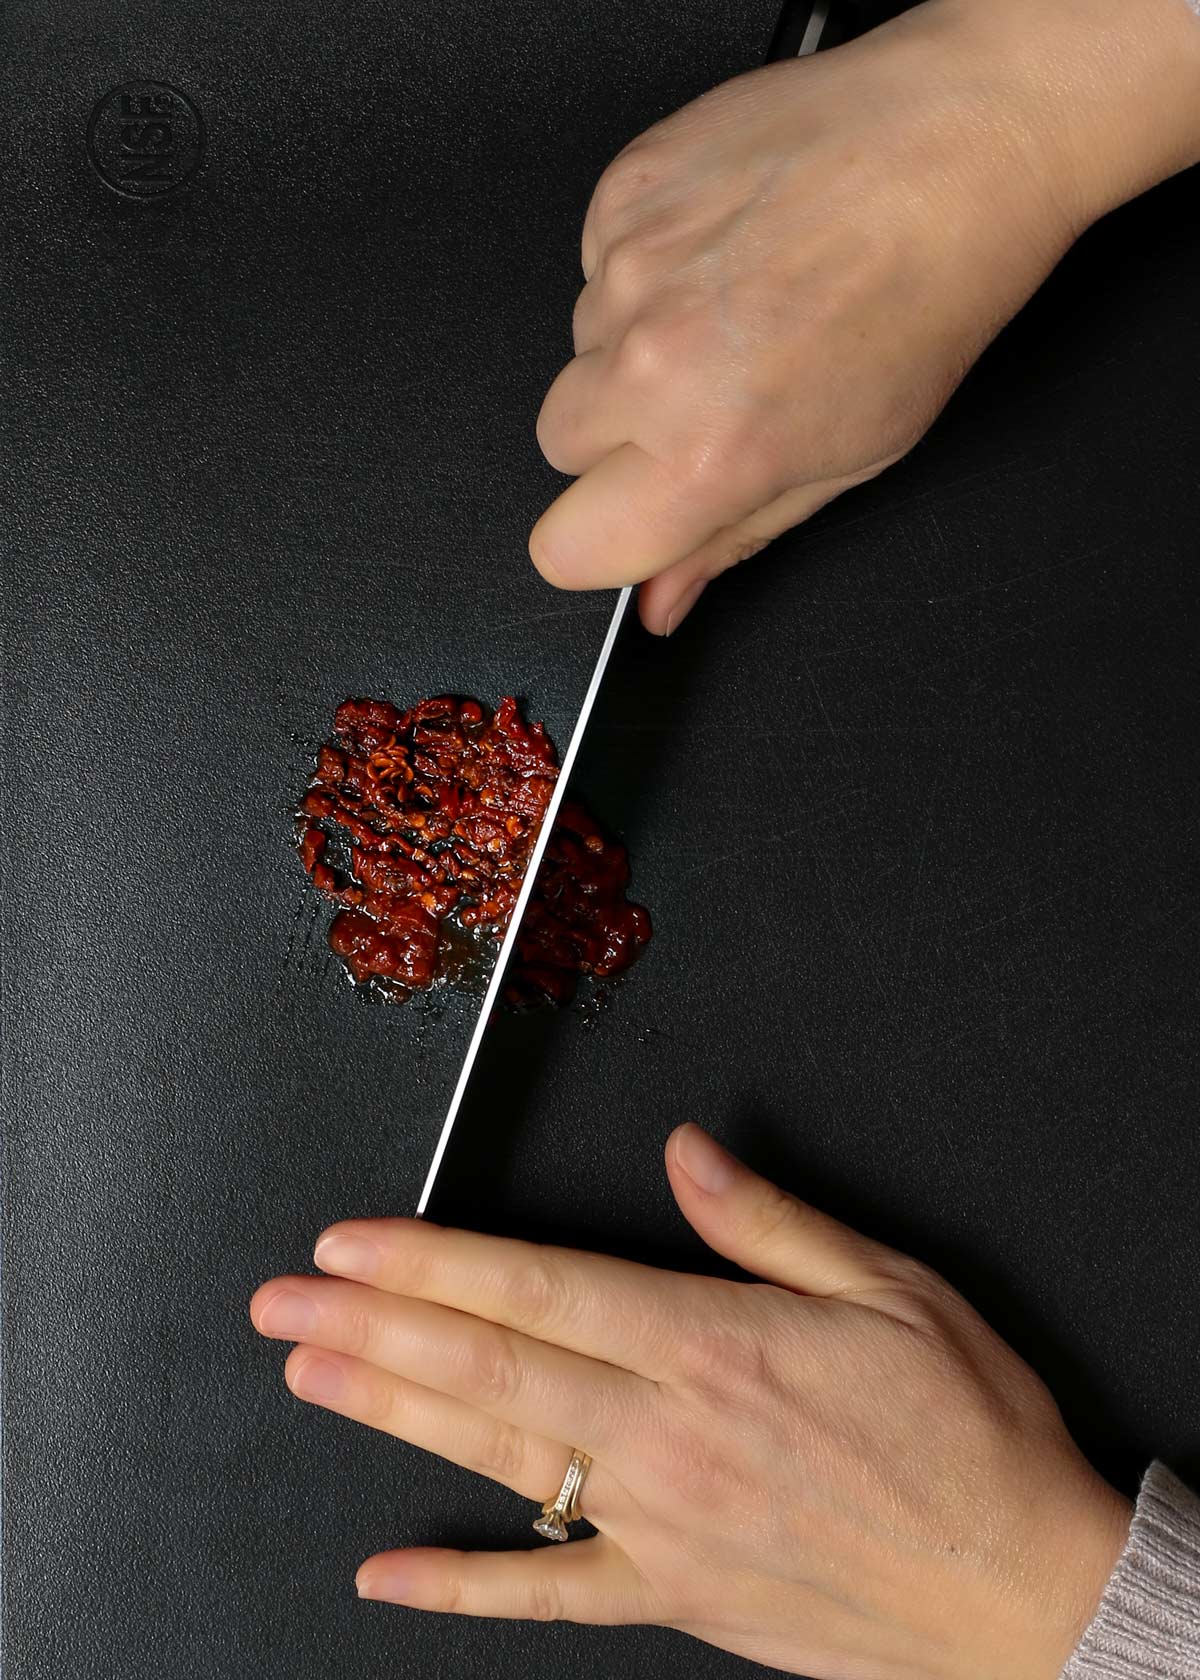 chopping chipotle peppers on a black cutting board.